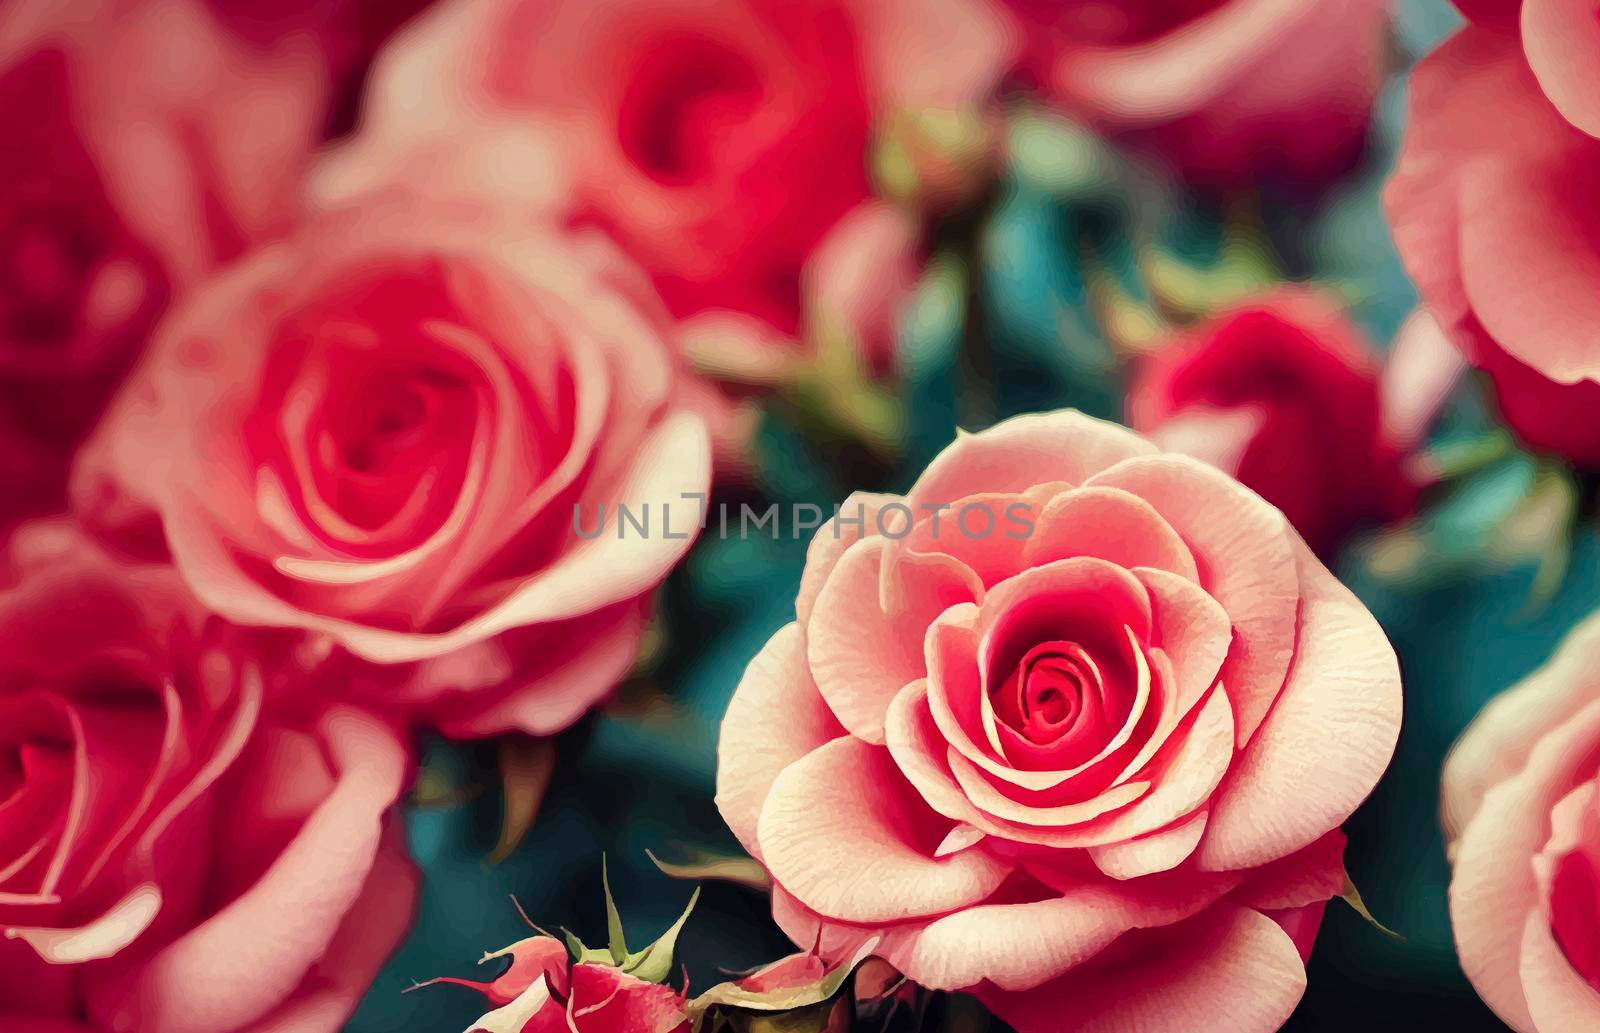 illustration of beautiful pink roses, pink roses background by JpRamos